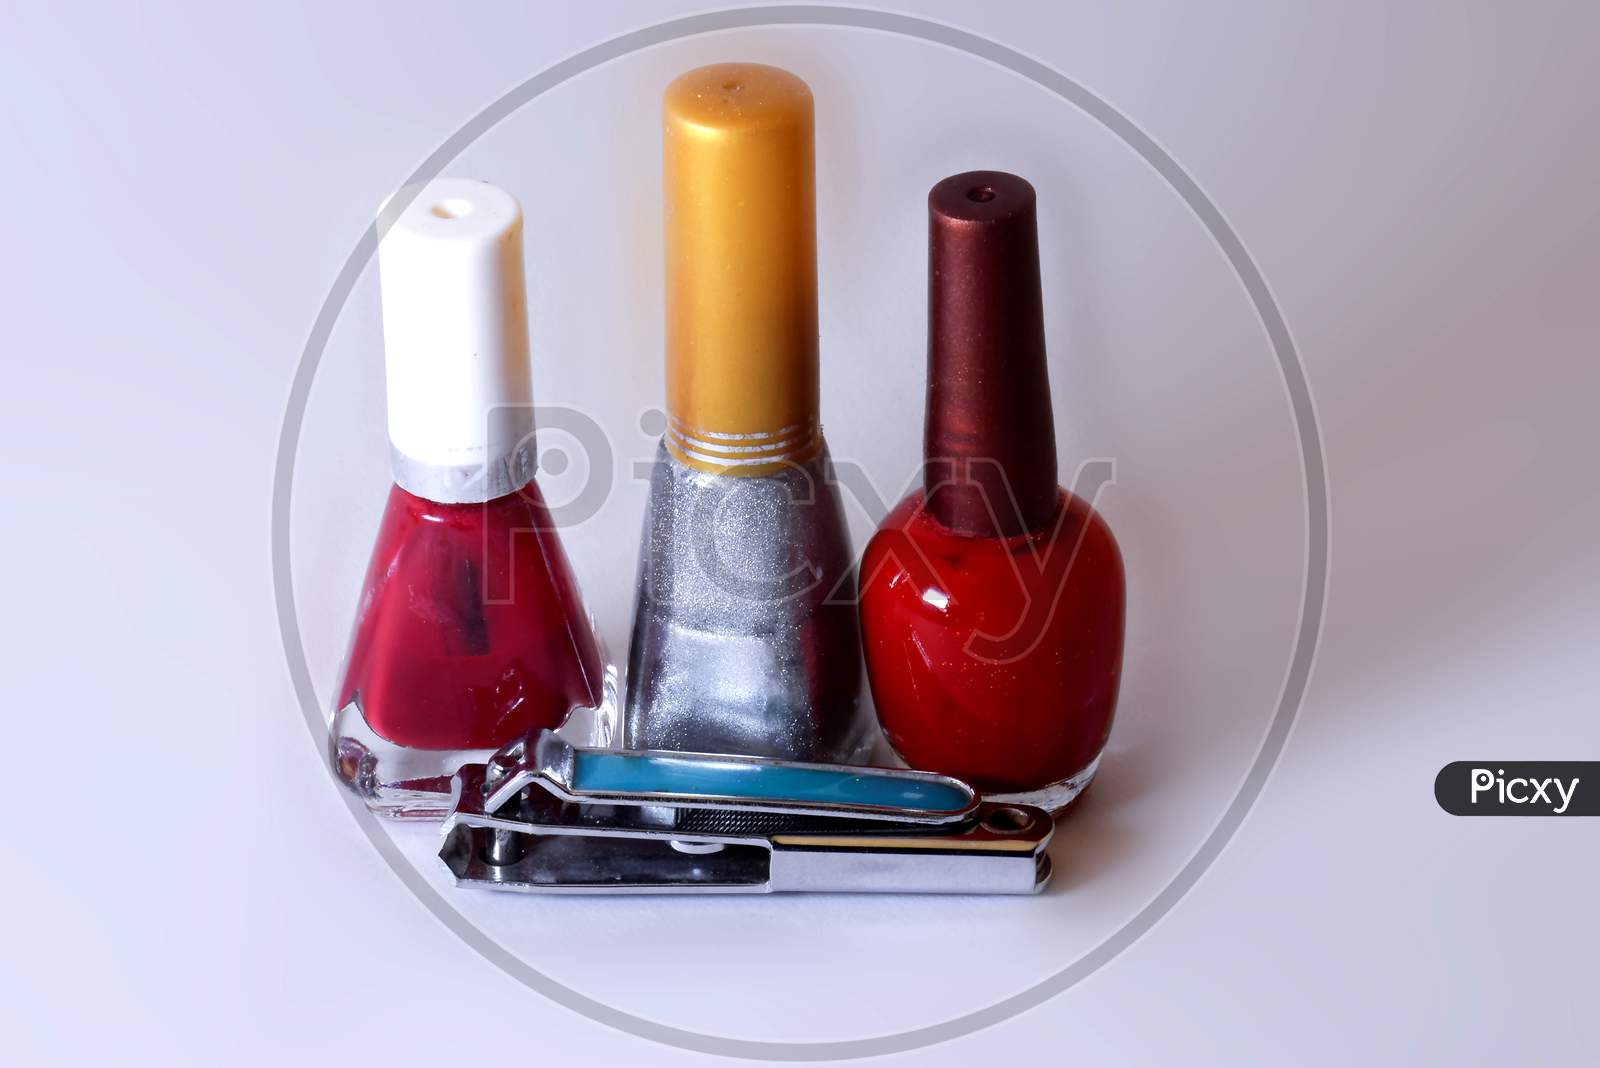 Colorful Nail Polish And Nail Cutter With White Background